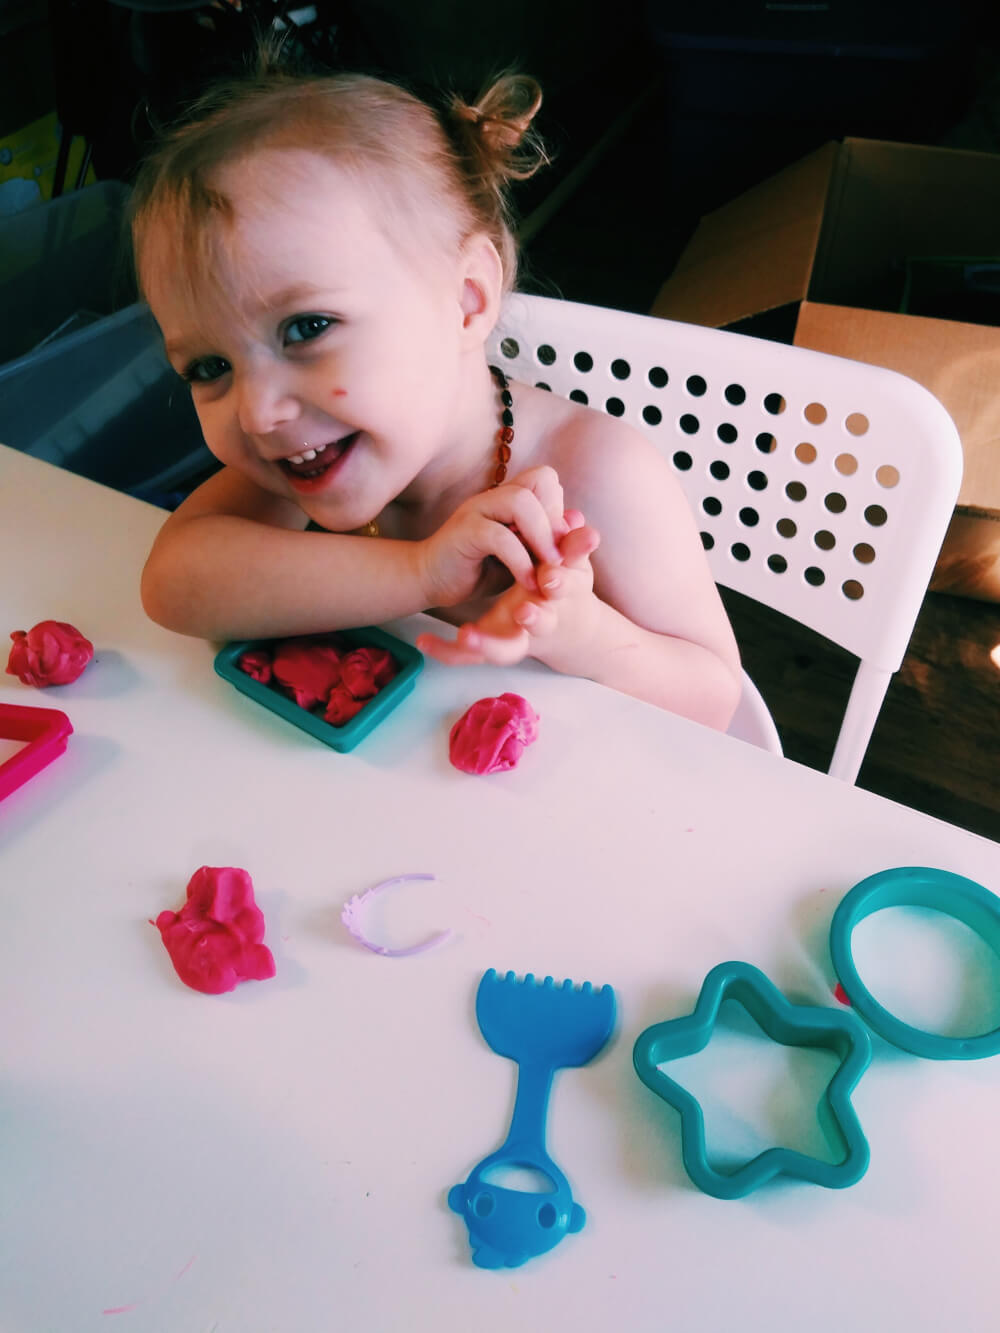 Caucasion toddler looking at photographer and giggling, while holding Playdough in hands